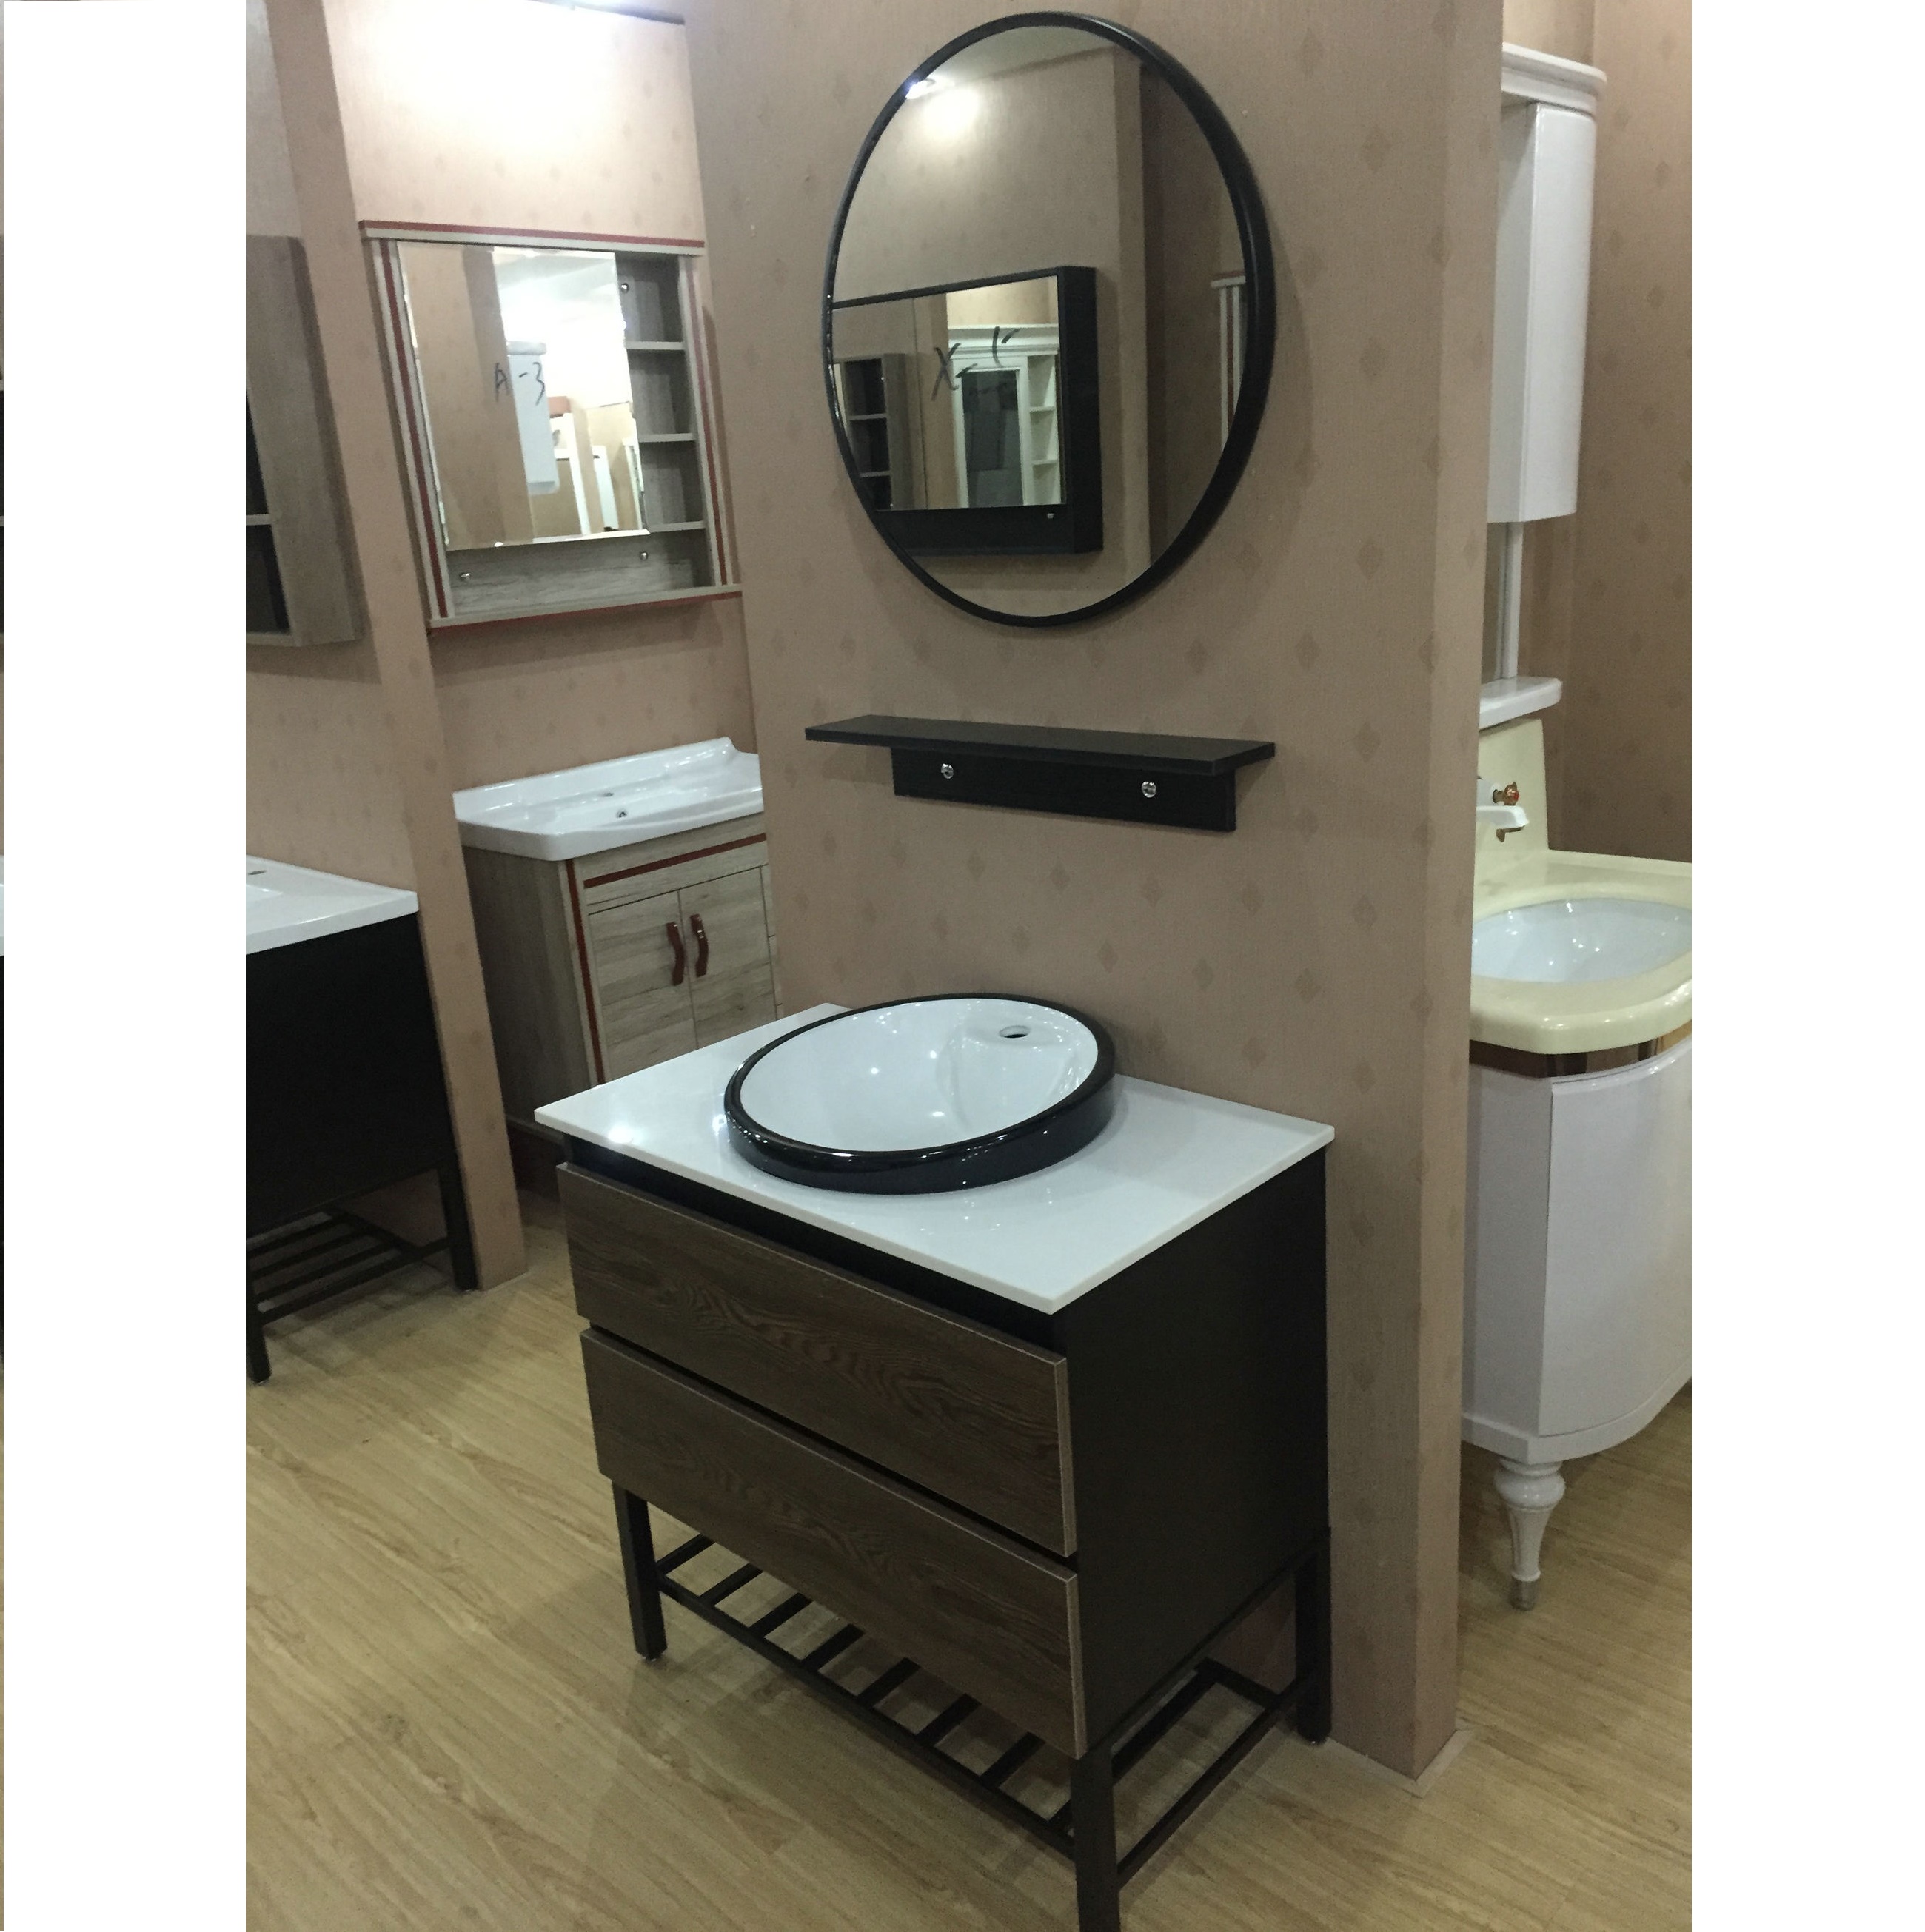 80cm bathroom vanity cabinet with counter top and above in basin and metal shelf legs